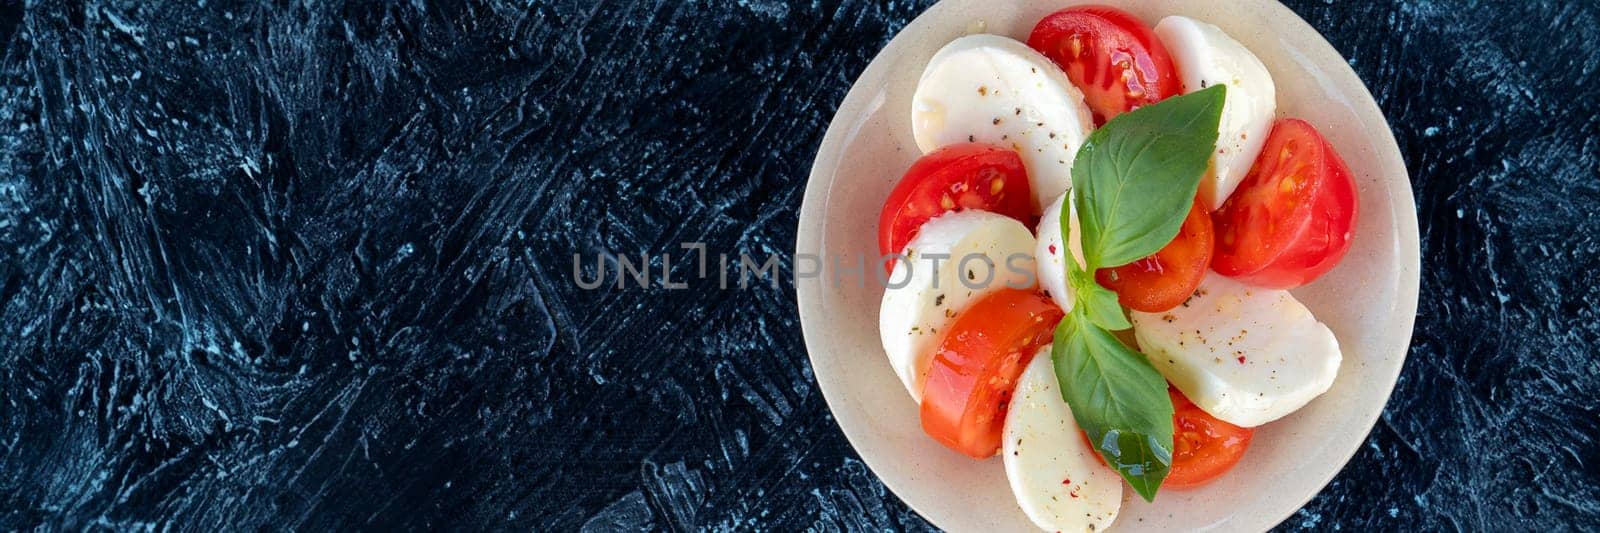 banner of caprese salad on a round plate. slices of juicy red tomato, with fresh mozzarella and basil leaves, poured with olive oil with spices. top view by Leoschka